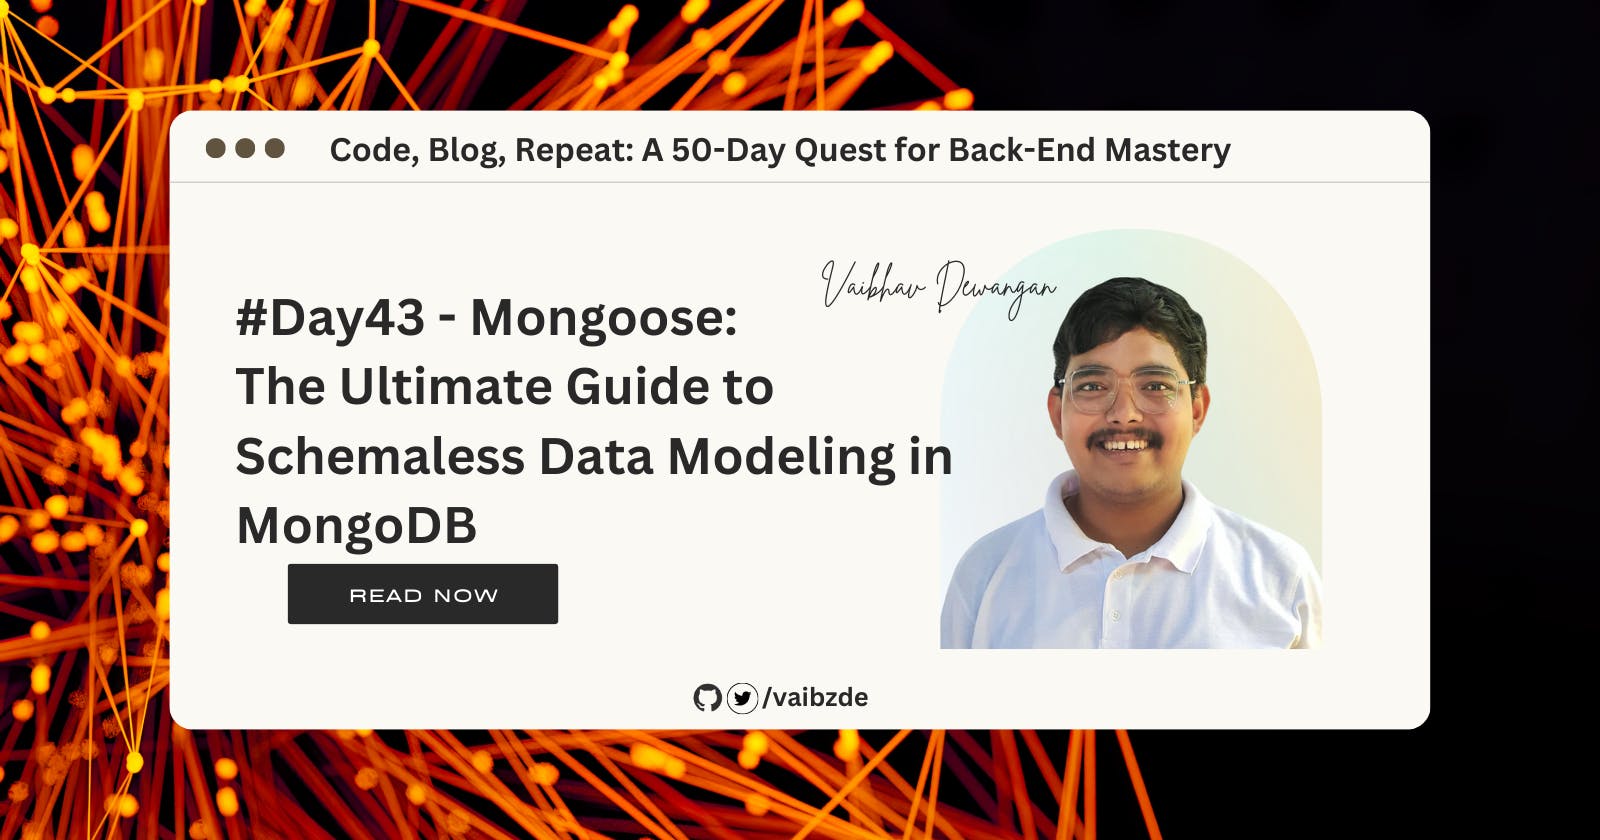 #Day43 - Mongoose: The Ultimate Guide to Schemaless Data Modeling in MongoDB